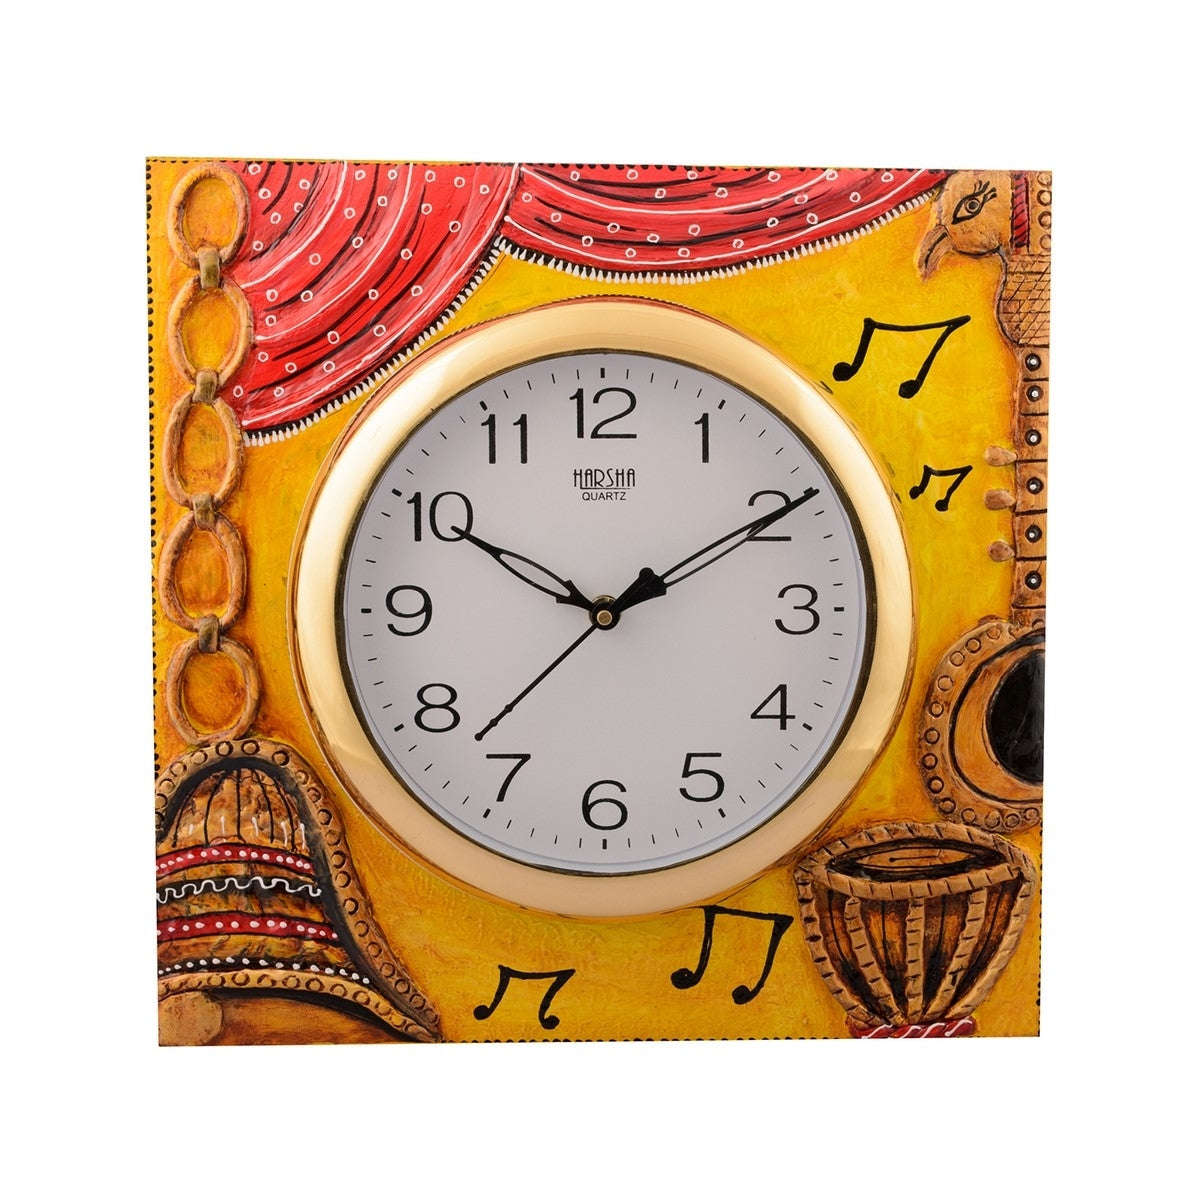 Artistic Handicrafted Square Shape Musical Instrument Designer Wooden Wall Clock